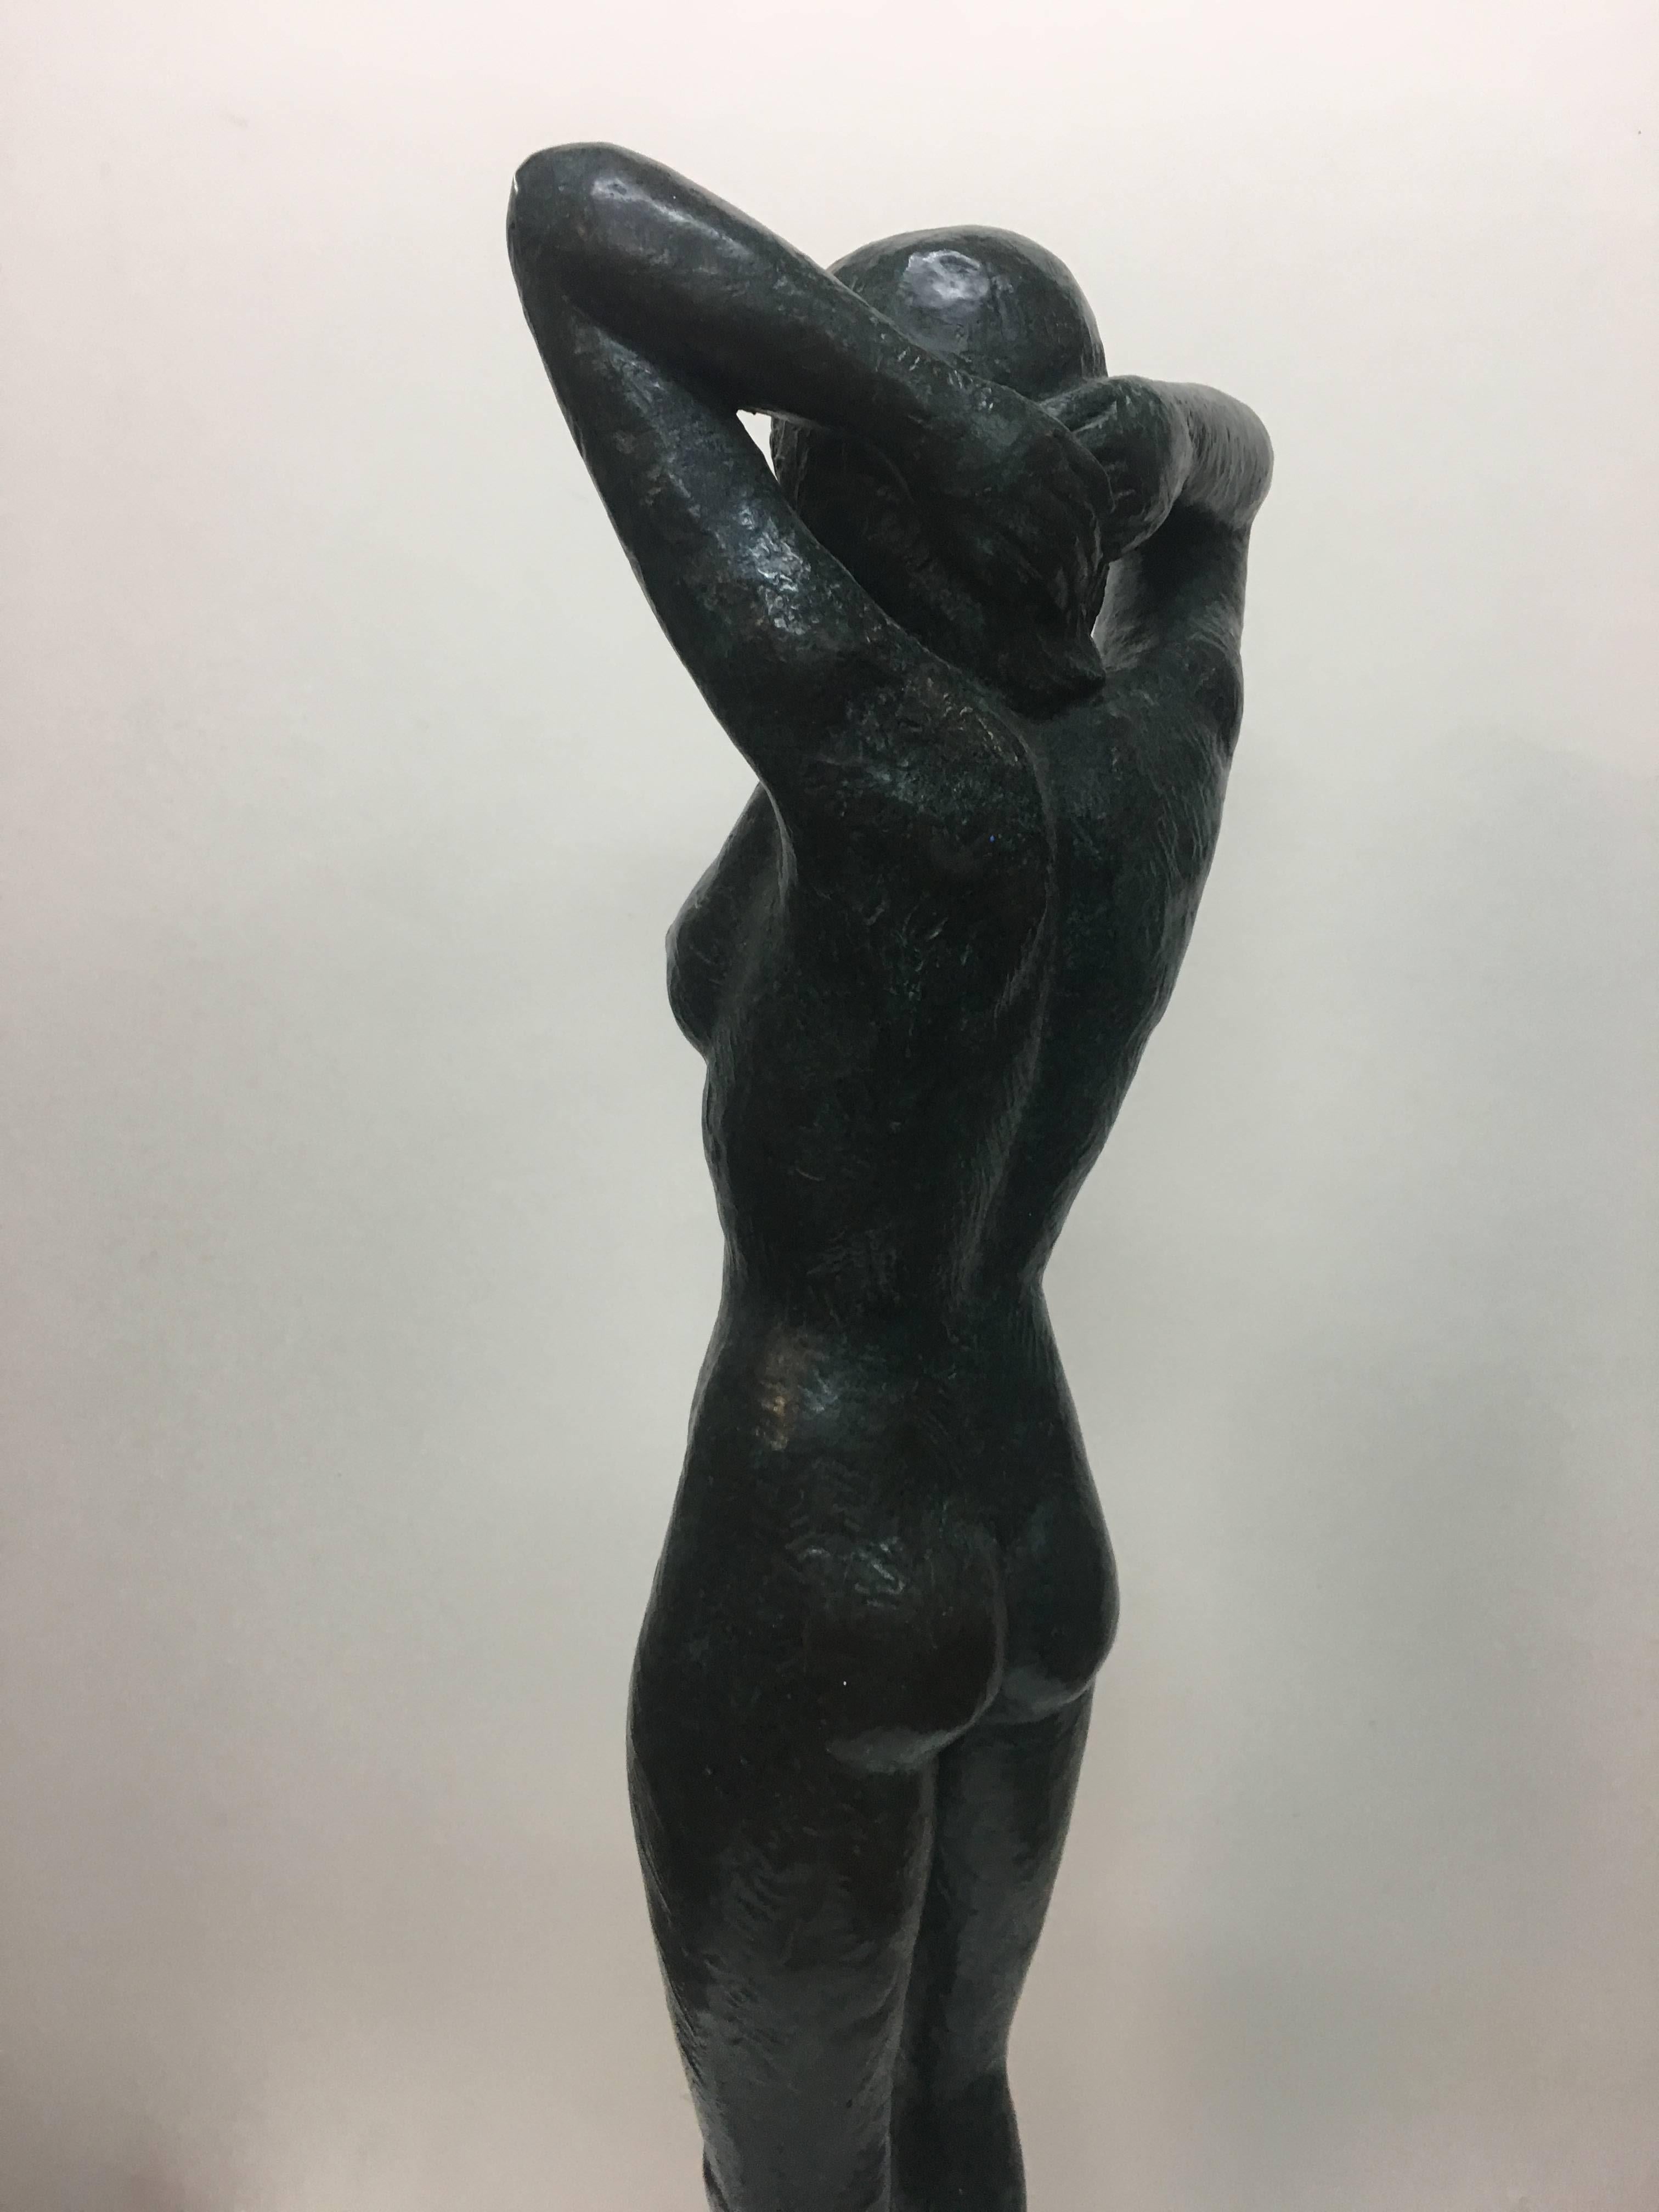 Original artwork by VILAMANYÀ.
Made in bronze on marble.
Exemplary V / VI copies.